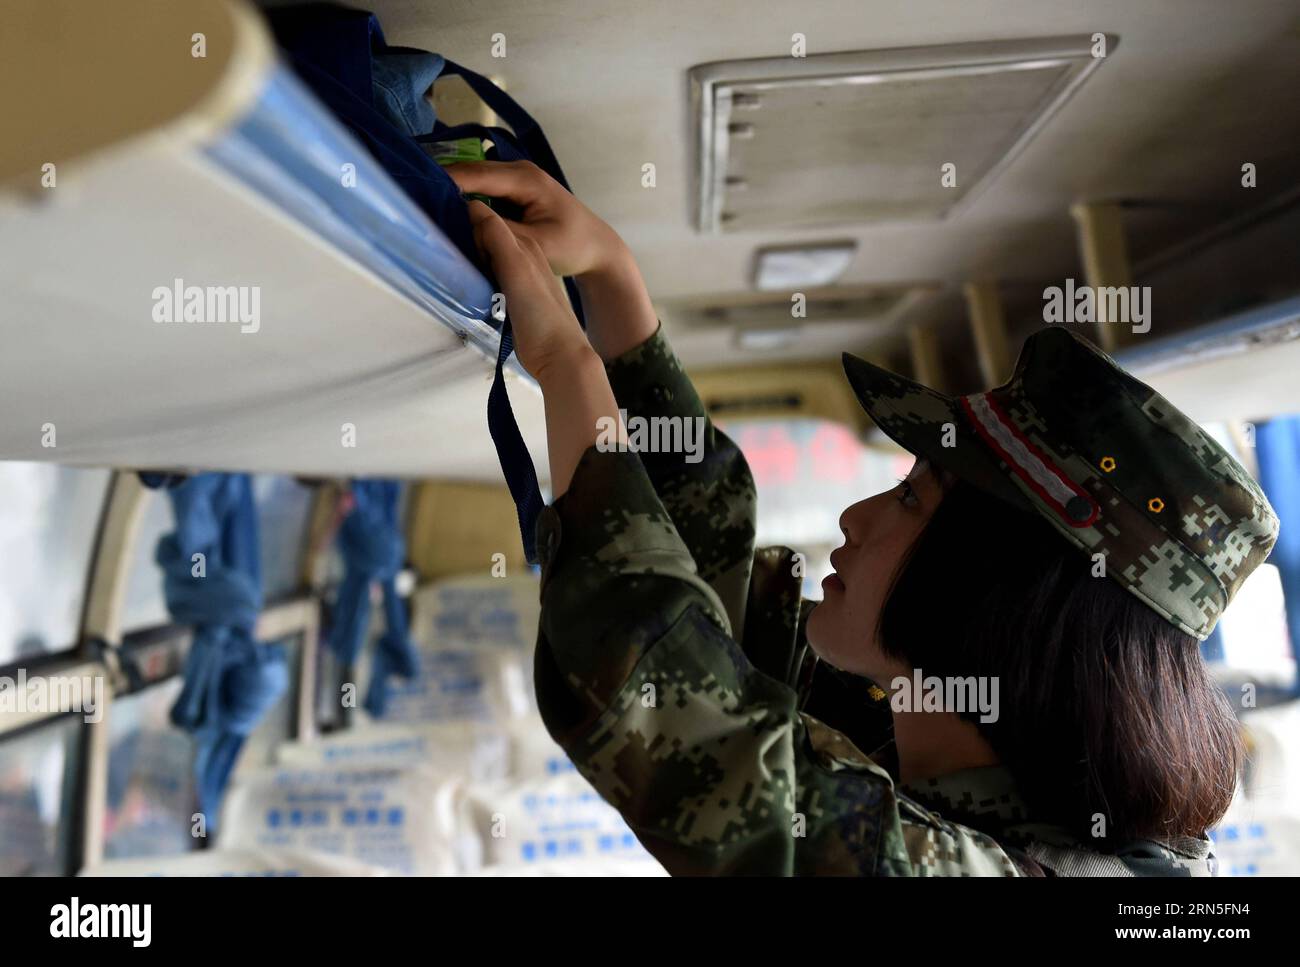 DEHONG, June 24, 2015 -- Zhang Liu checks a bus for contraband at the border checkpoint of Mukang in Dehong Dai-Jingpo Autonomous Prefecture, southwest China s Yunnan Province, June 24, 2015. Born in 1995, Zhang Liu became an anti-drug soldier in border checkpoint of Mukang in 2013. Grown up in an affluent family in central China s Hunan Province, Zhang said that being a soldier had always been her dream, which drove her to join the army after graduating from high school. Being a front line anti-drug force, the border checkpoint of Mukang has captured about 100 kilograms of drugs since the beg Stock Photo